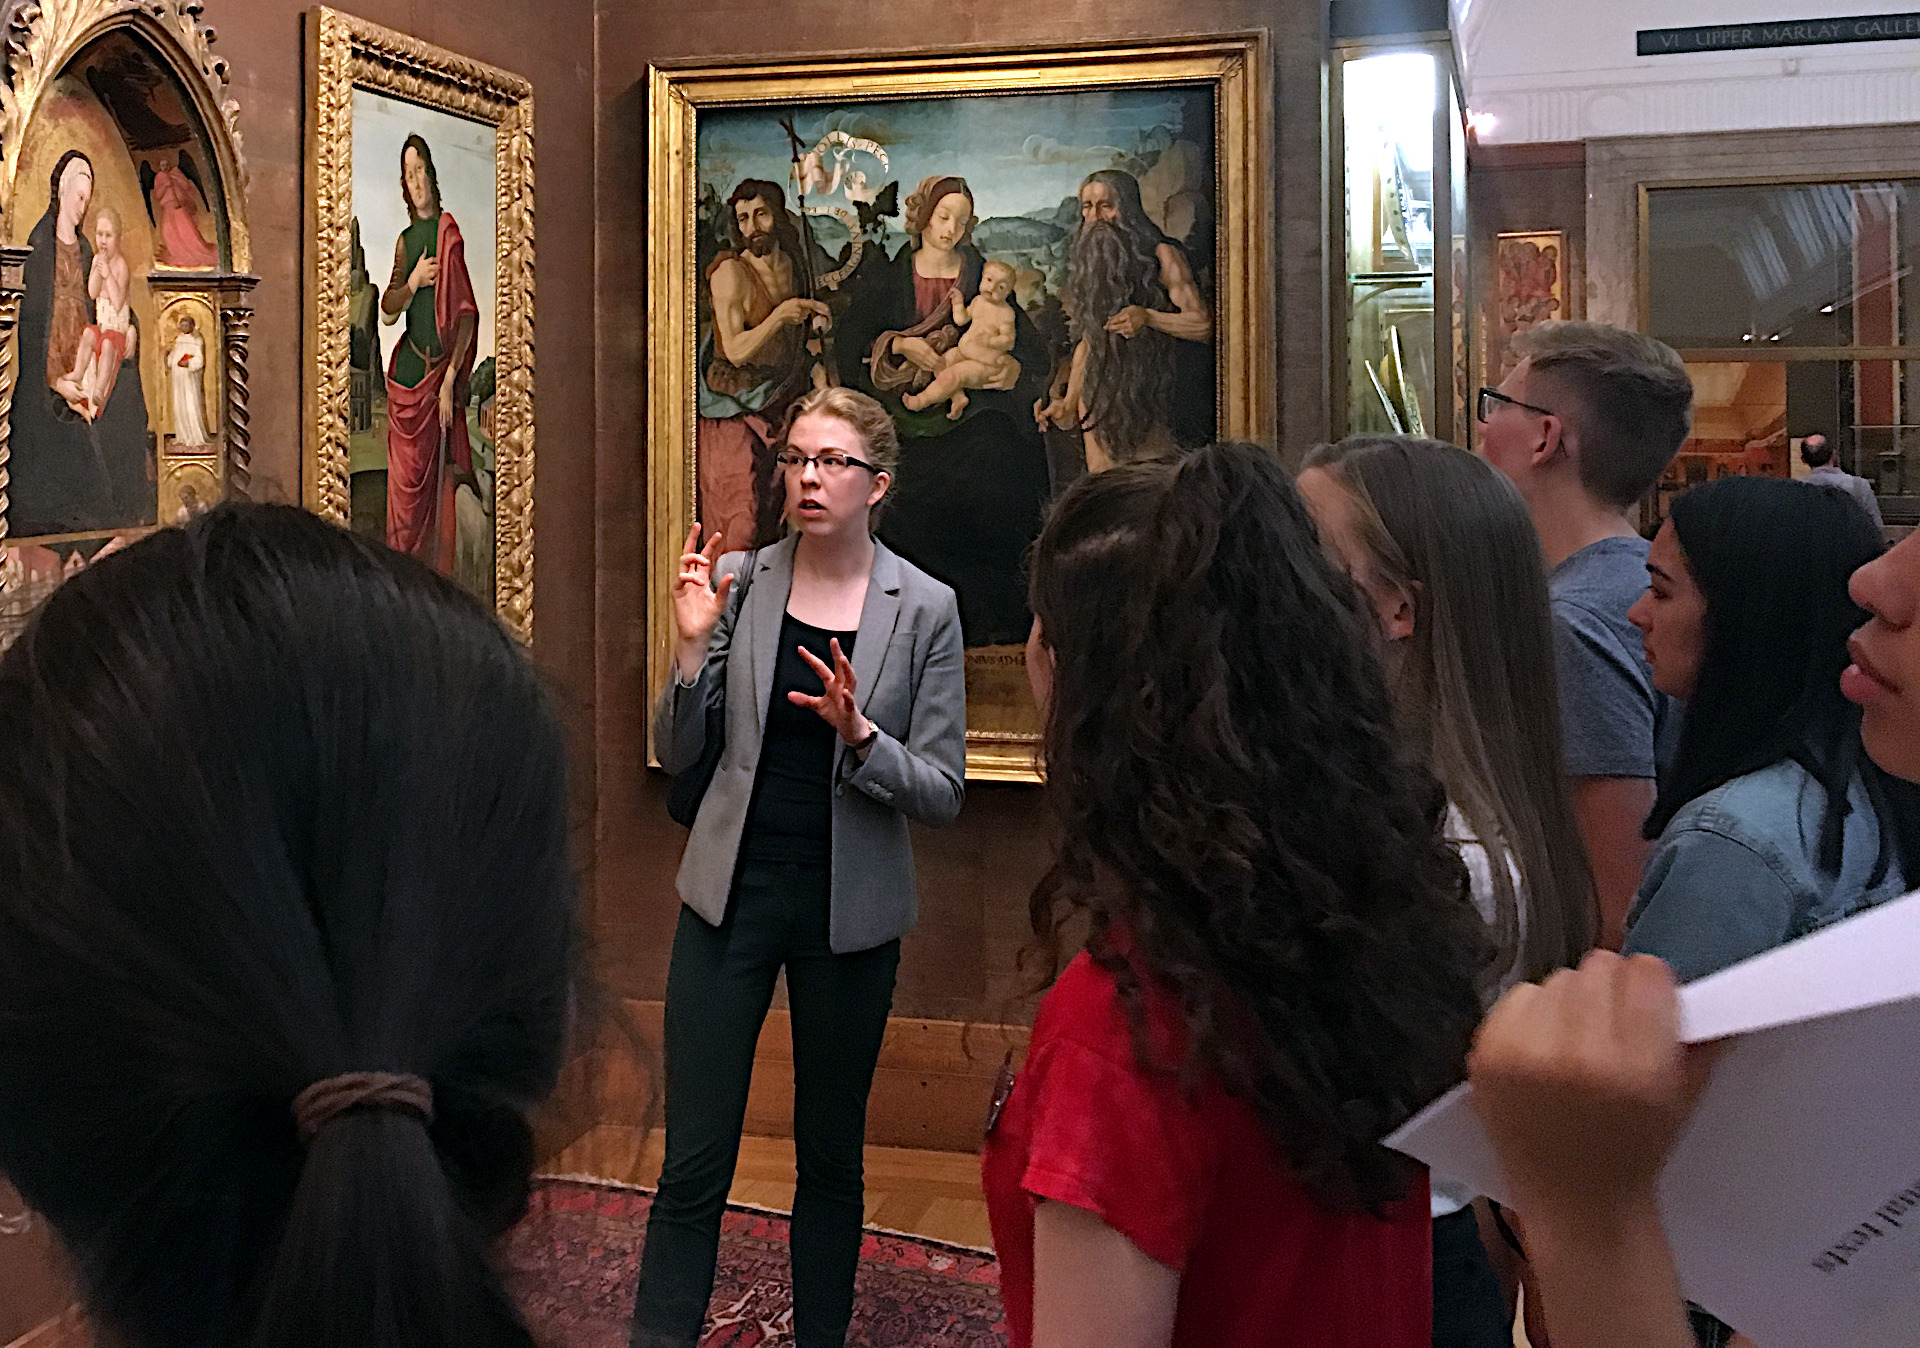 Our former fellow Dr Helena Phillips-Robins and students discussing Italian paintings in the Fitzwilliam Museum